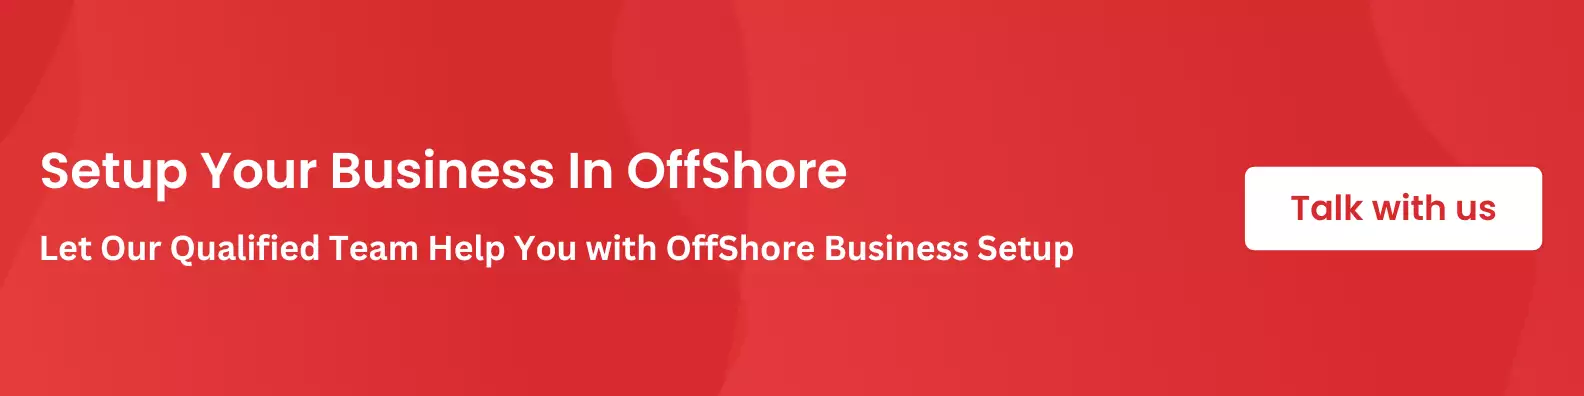 business-setup-offshore